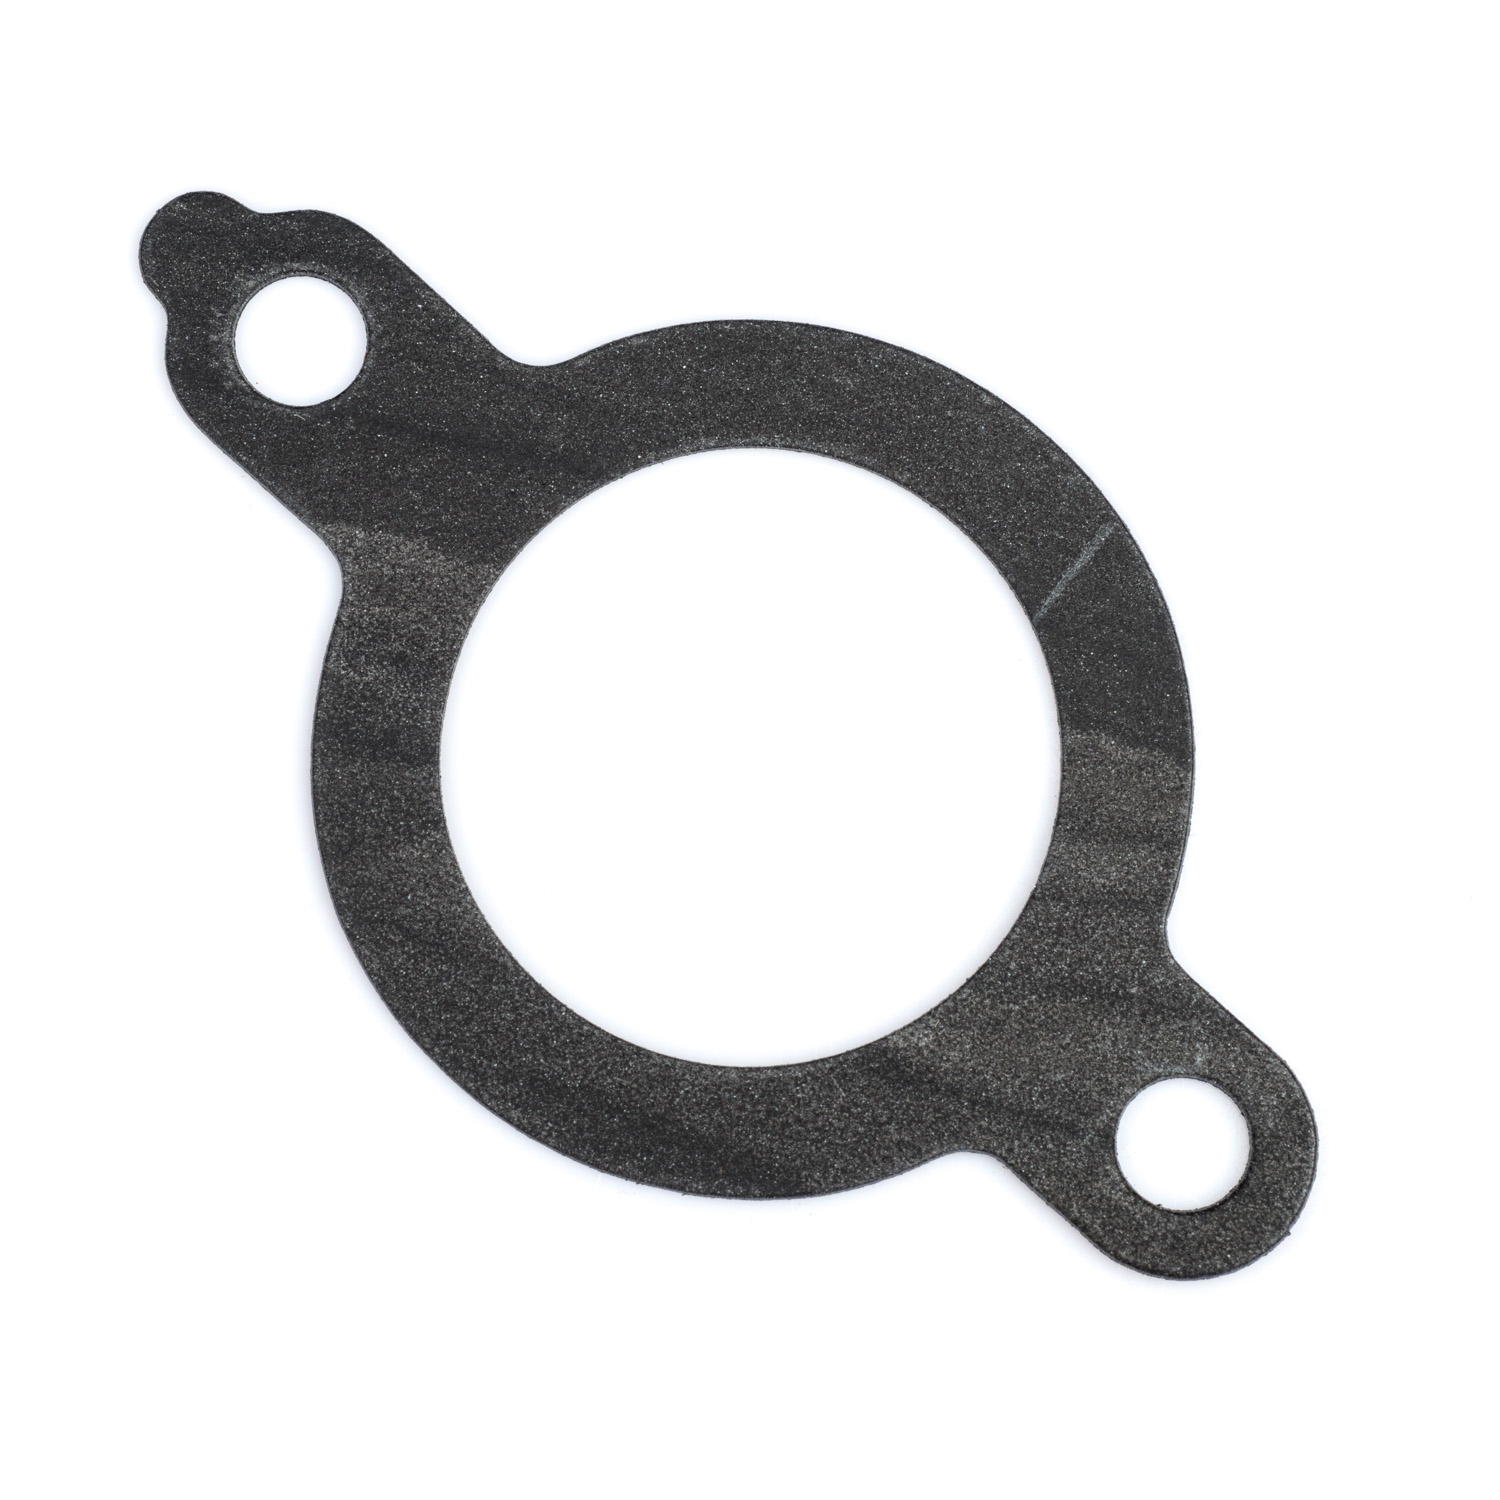 FZ600 Carb Inlet Rubber Gasket